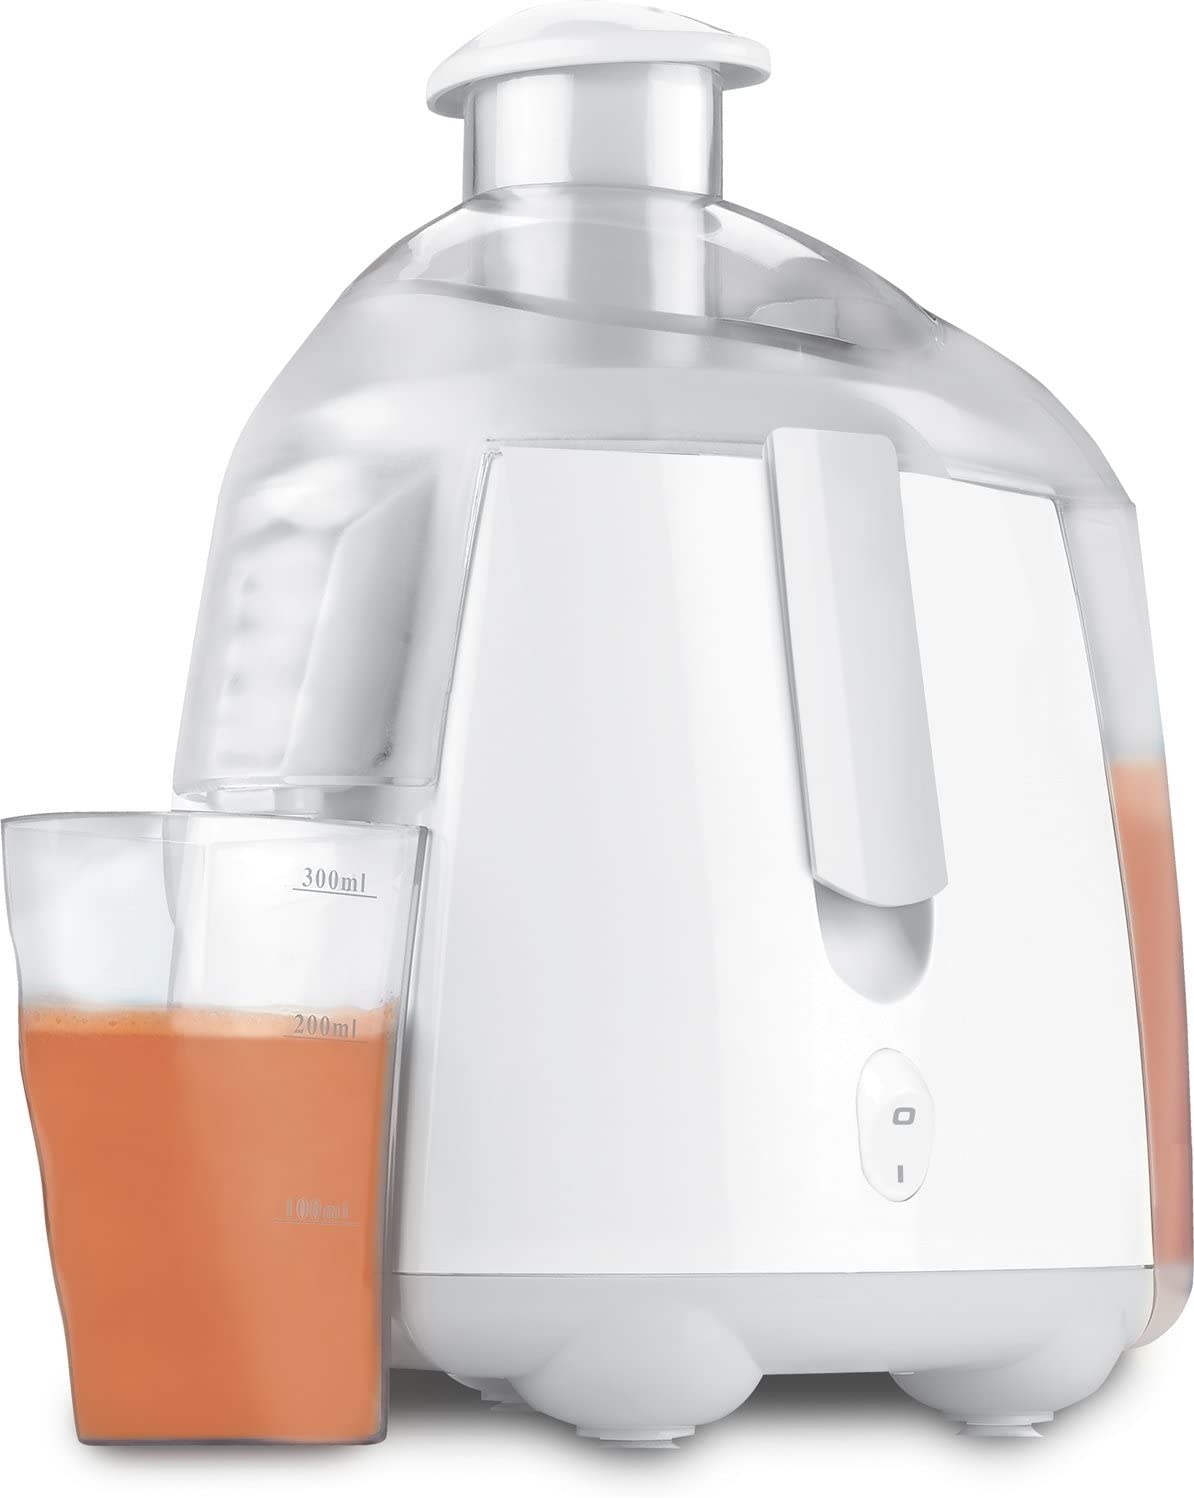 Black & Decker JE2100 10-Ounce Fruit-and-Vegetable Juice Extractor Import To Shop ×Product customization General Description